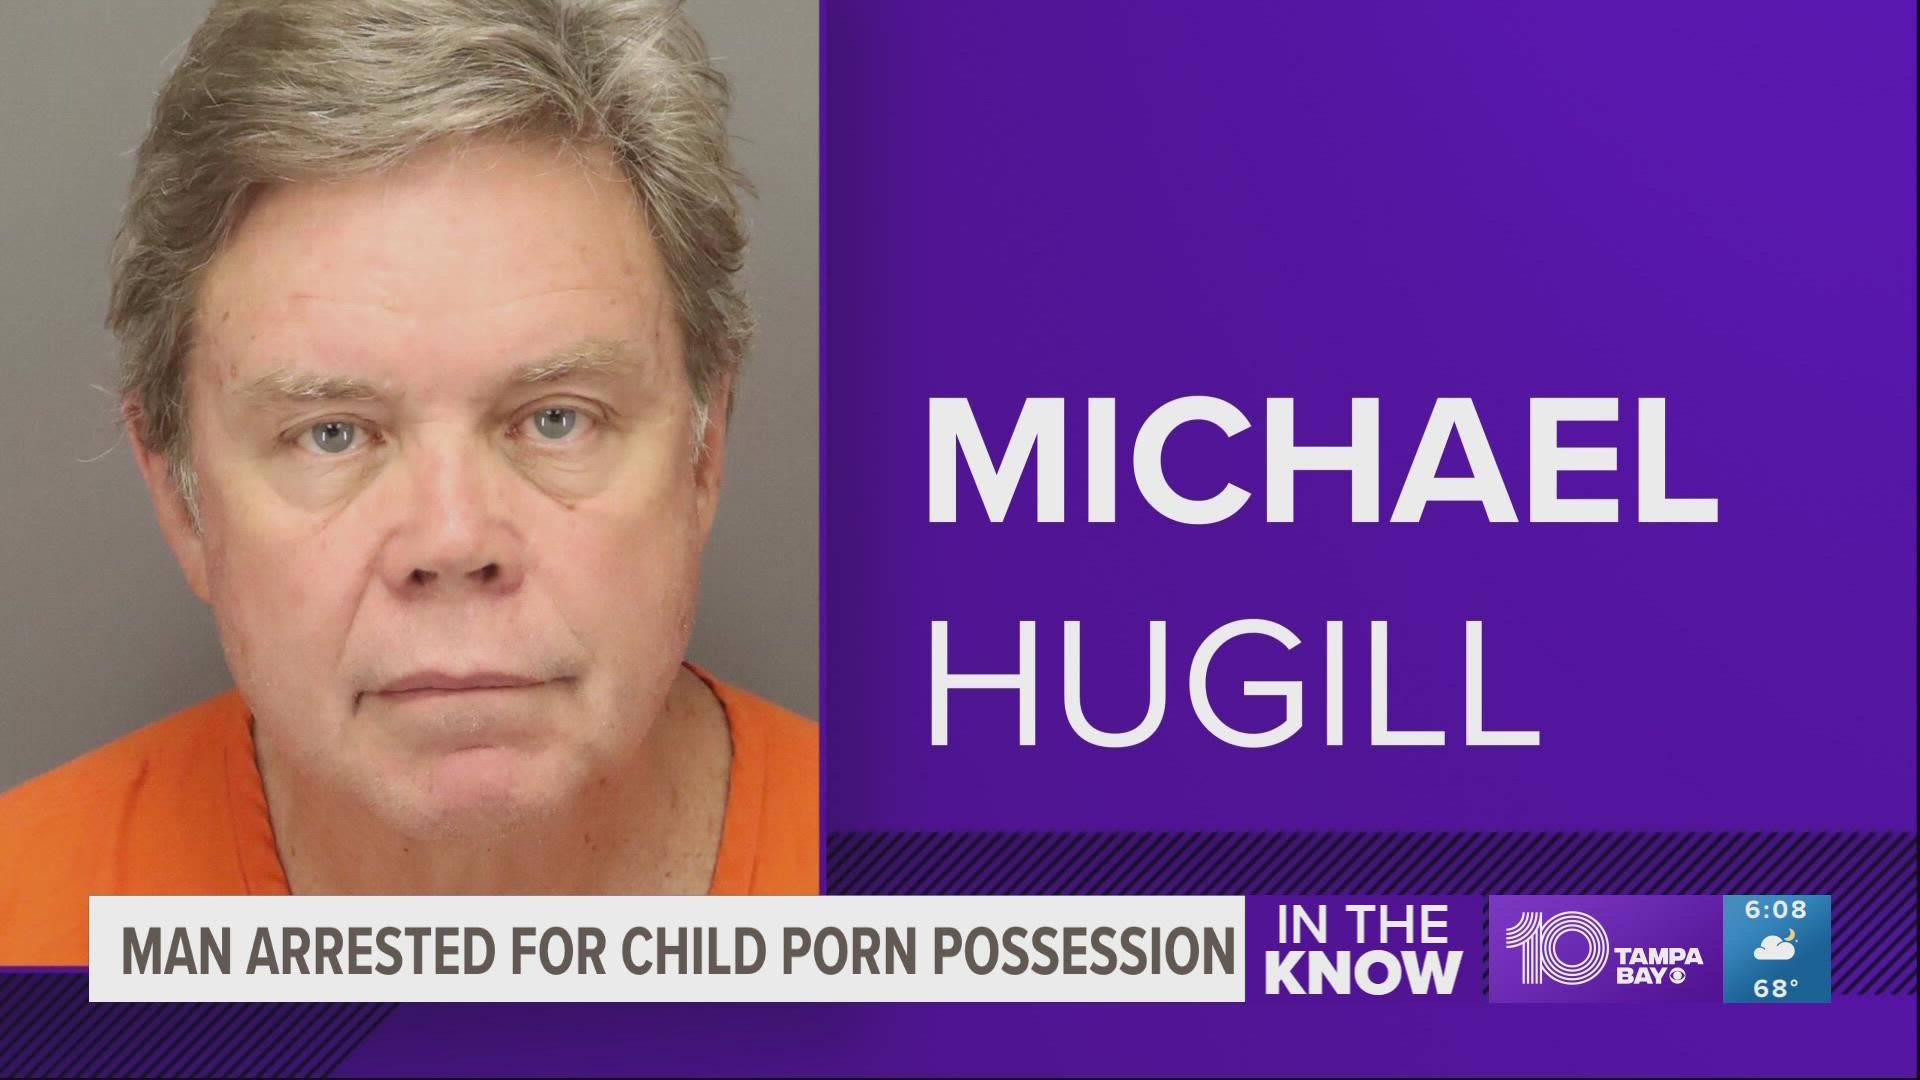 Detectives say child pornography was found on several electronic devices belonging to 69-year-old Michael Hugill.